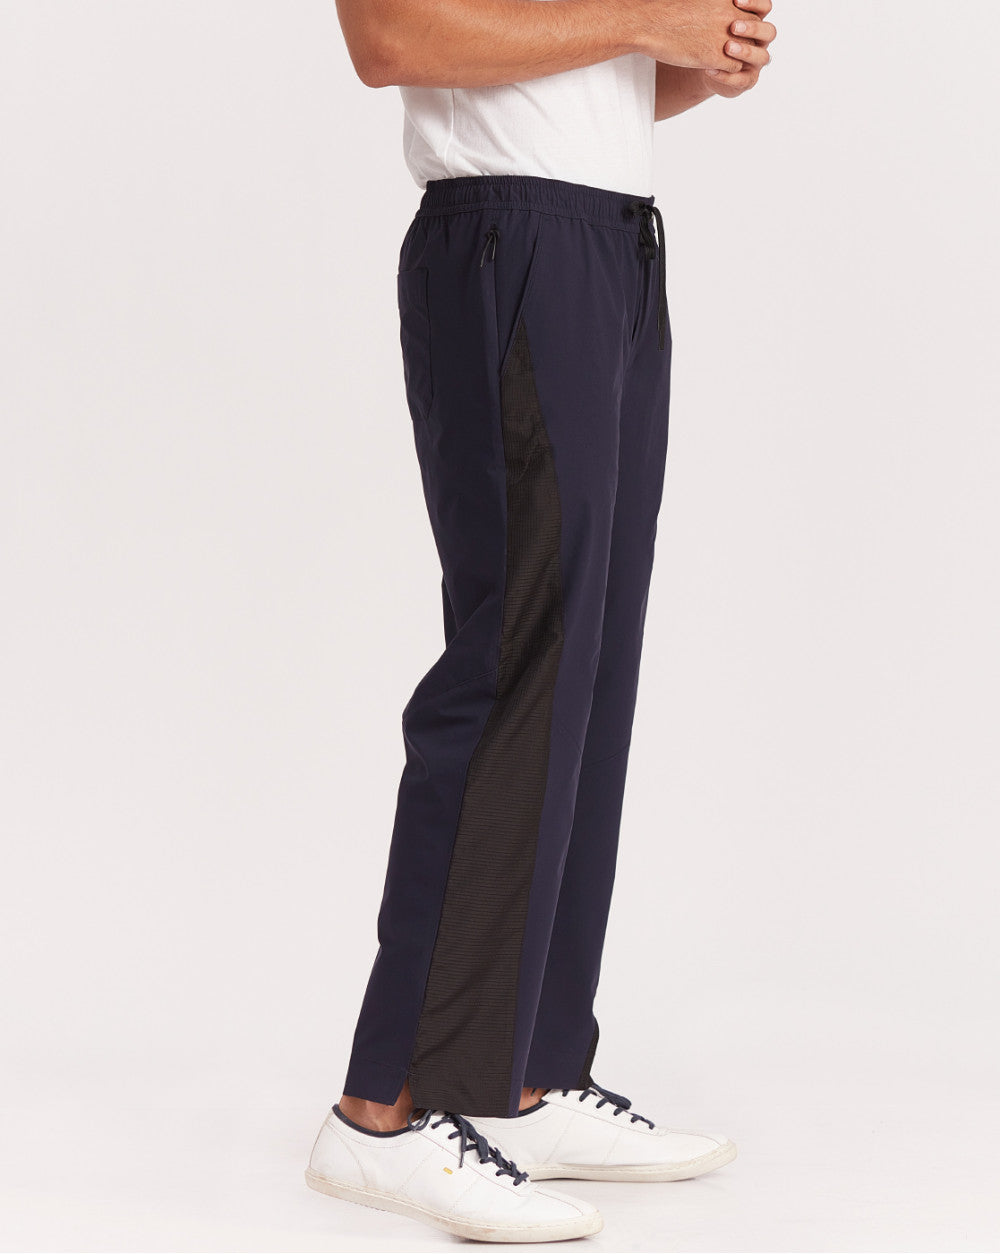 Regular Fit All-Day Track Pants - Navy